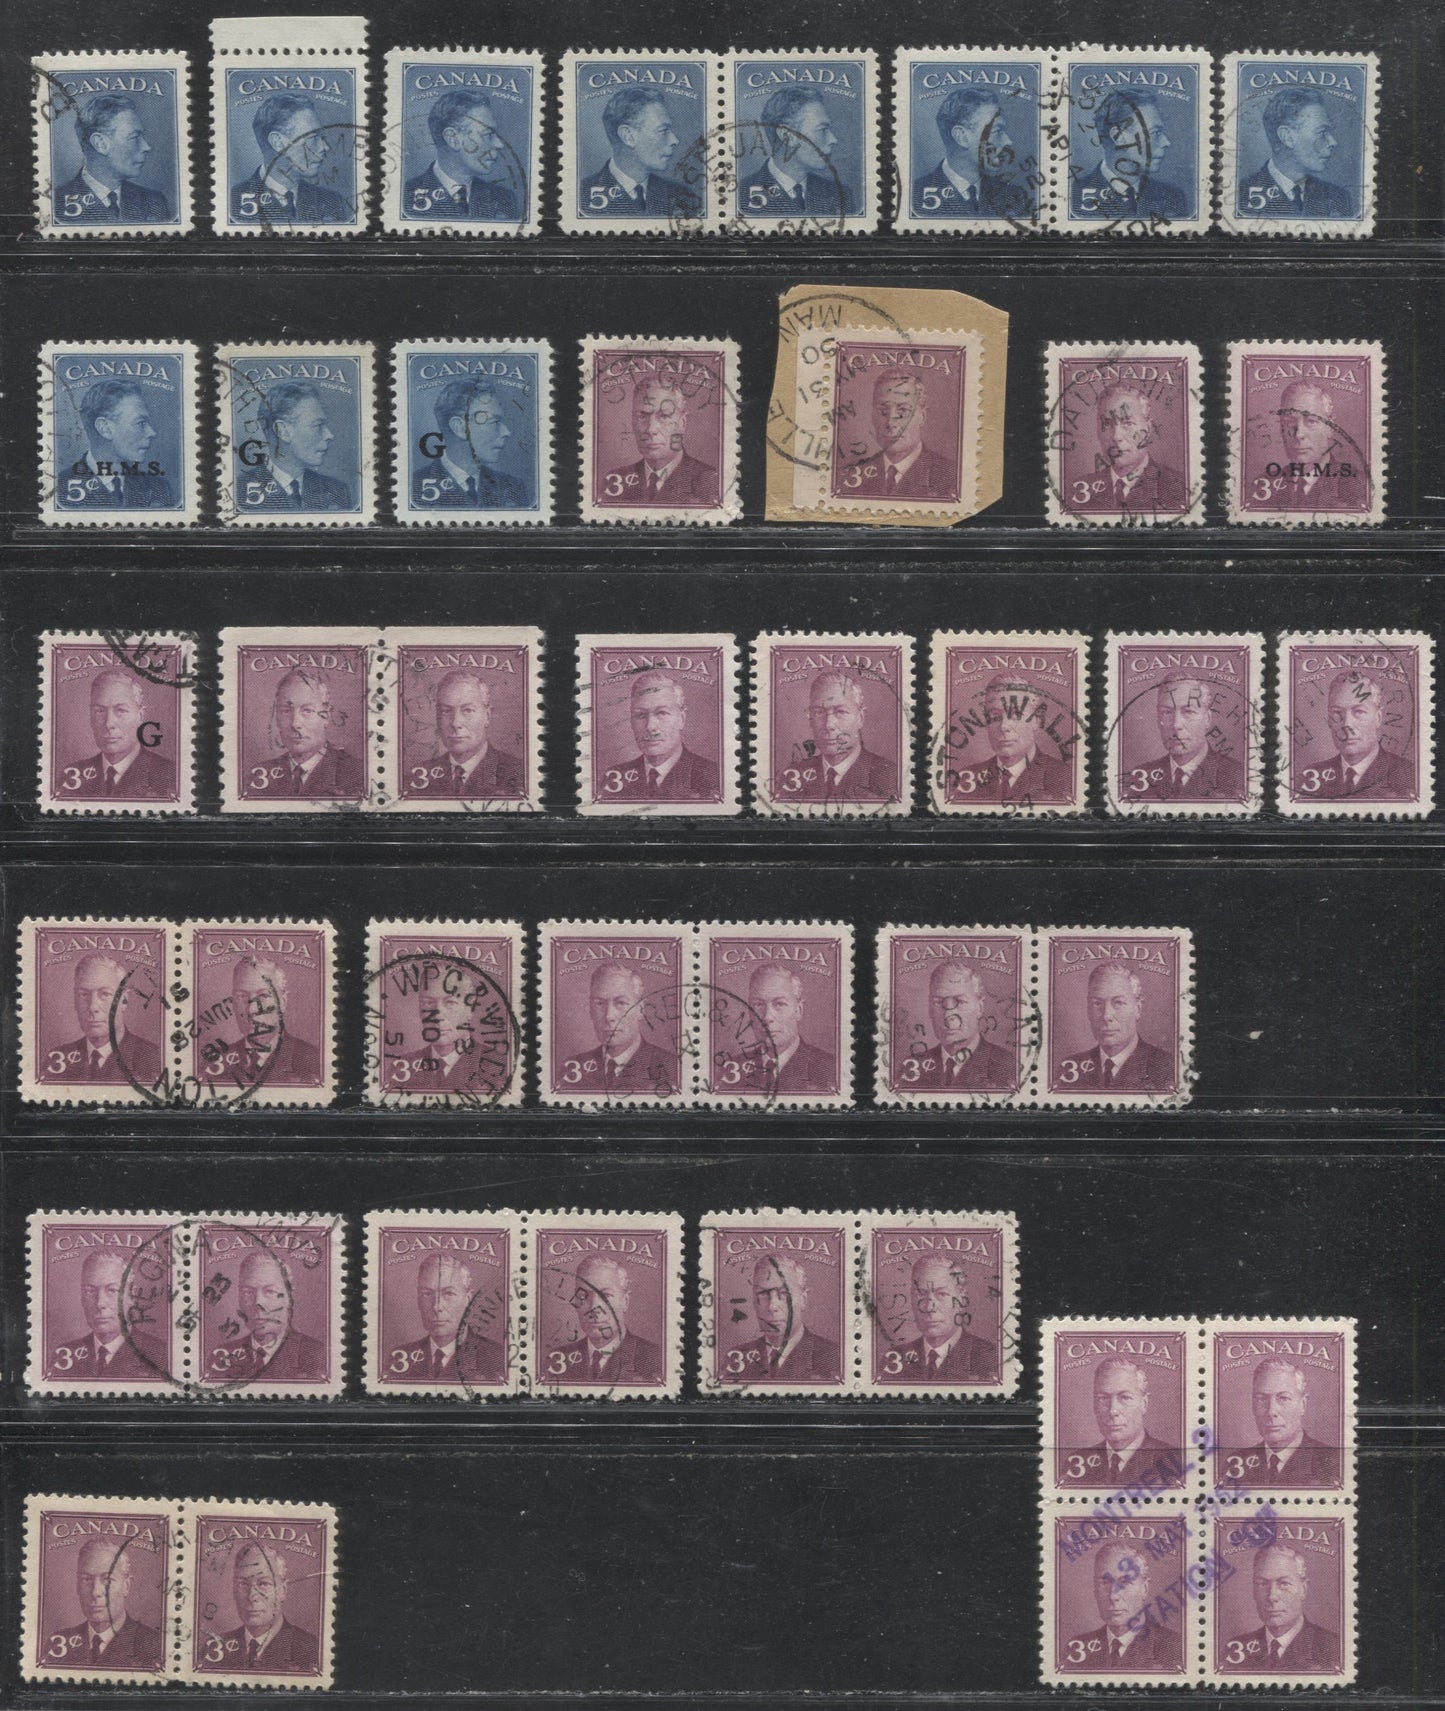 Lot 158 Canada #288, 293, O15A,O20, 286, 291, 299, O14, O18 & 291 3c & 5c Rose Violet & Deep Blue King George VI, 1949-1953 Postes-Postage, Omitted & Overprint Issues, 42 Used, Mostly VF CDS Singles, Pairs & Blocks Many Different Town Cancels